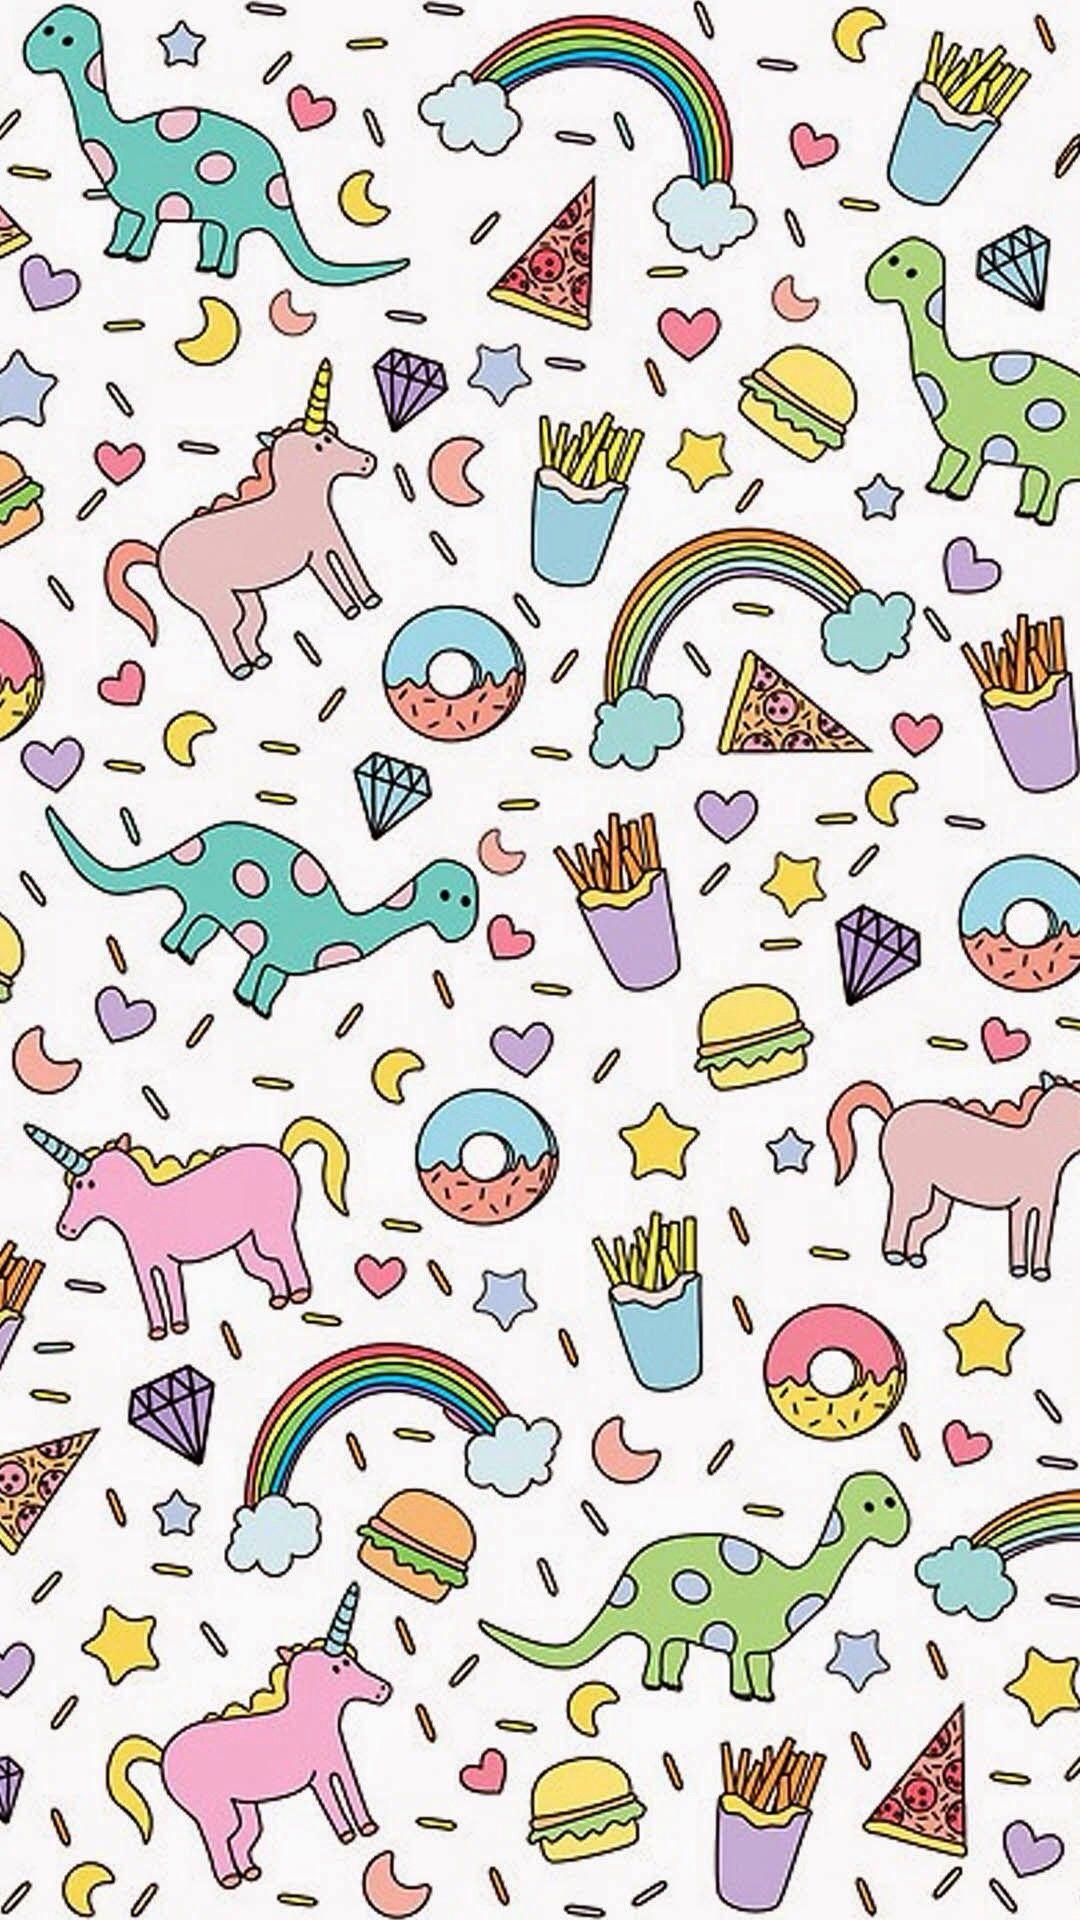 Unicorns, dinosaurs, donuts, burgers, and fries pattern